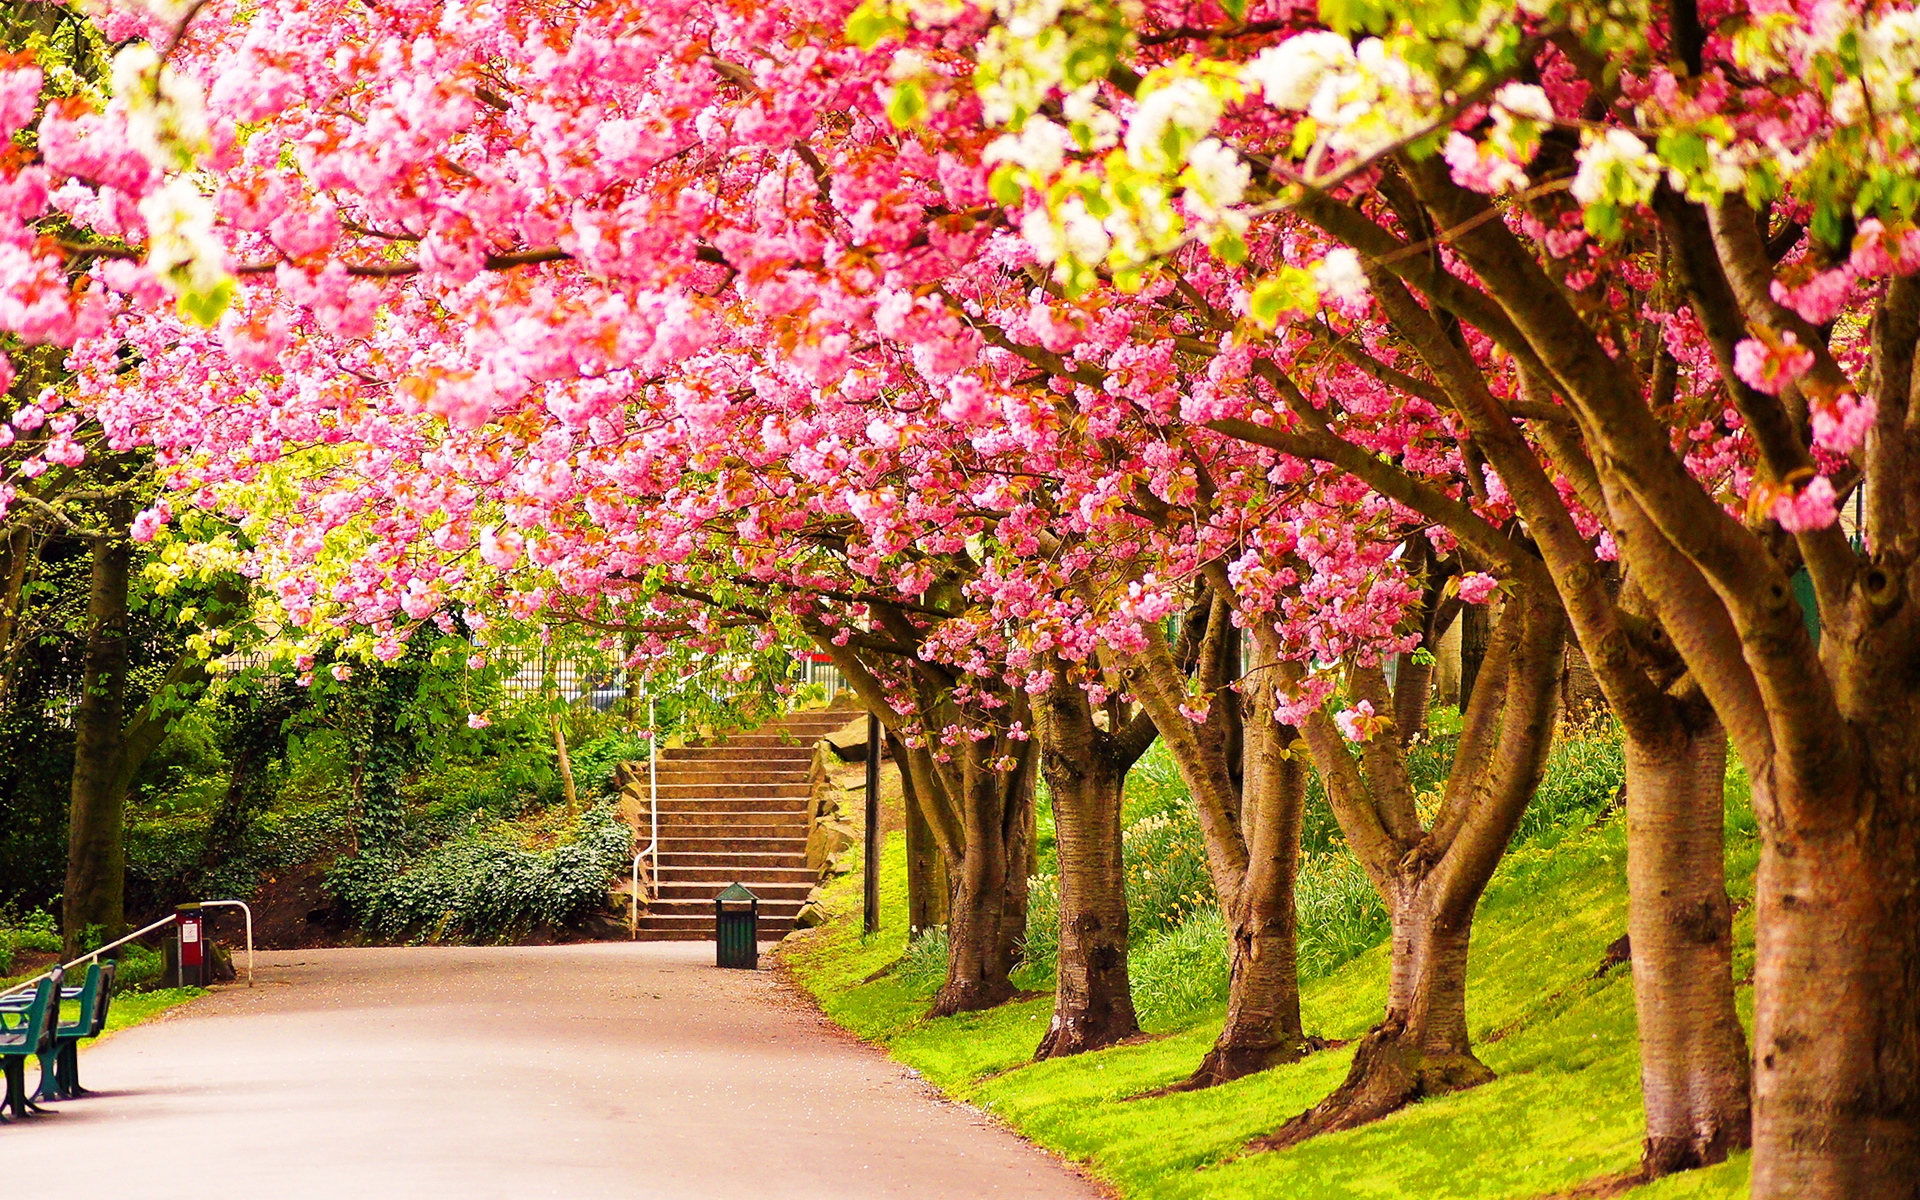 Spring Background Wallpaper Sf